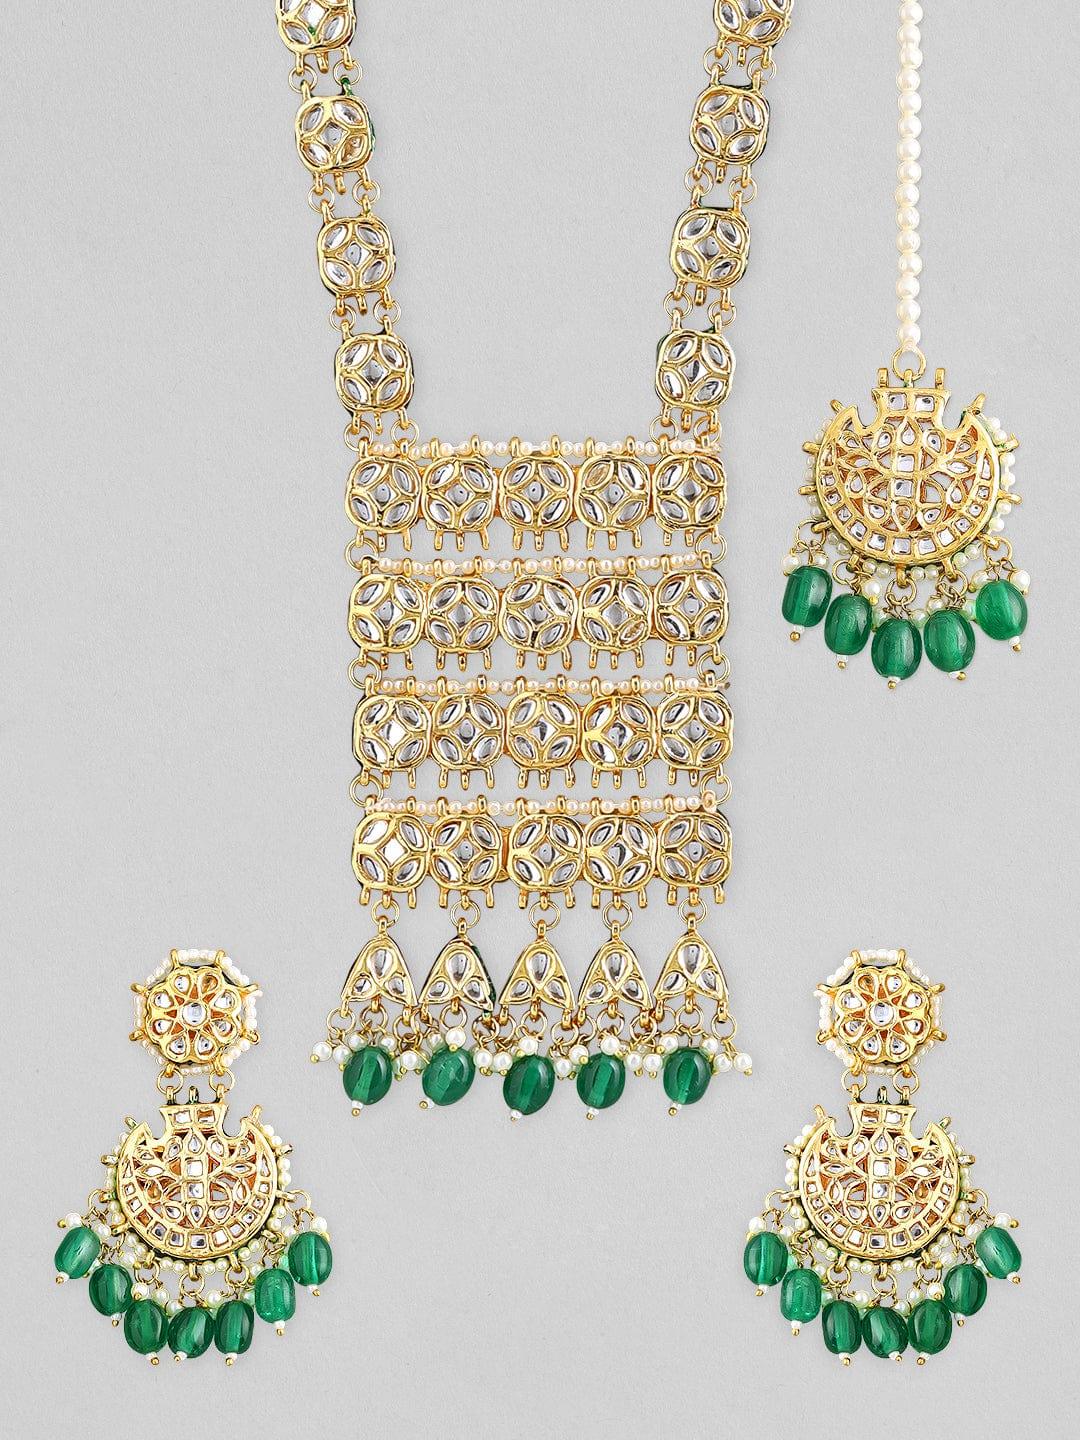 Rubans 22k gold plated necklace set with diamonds and green beads design. - Indiakreations